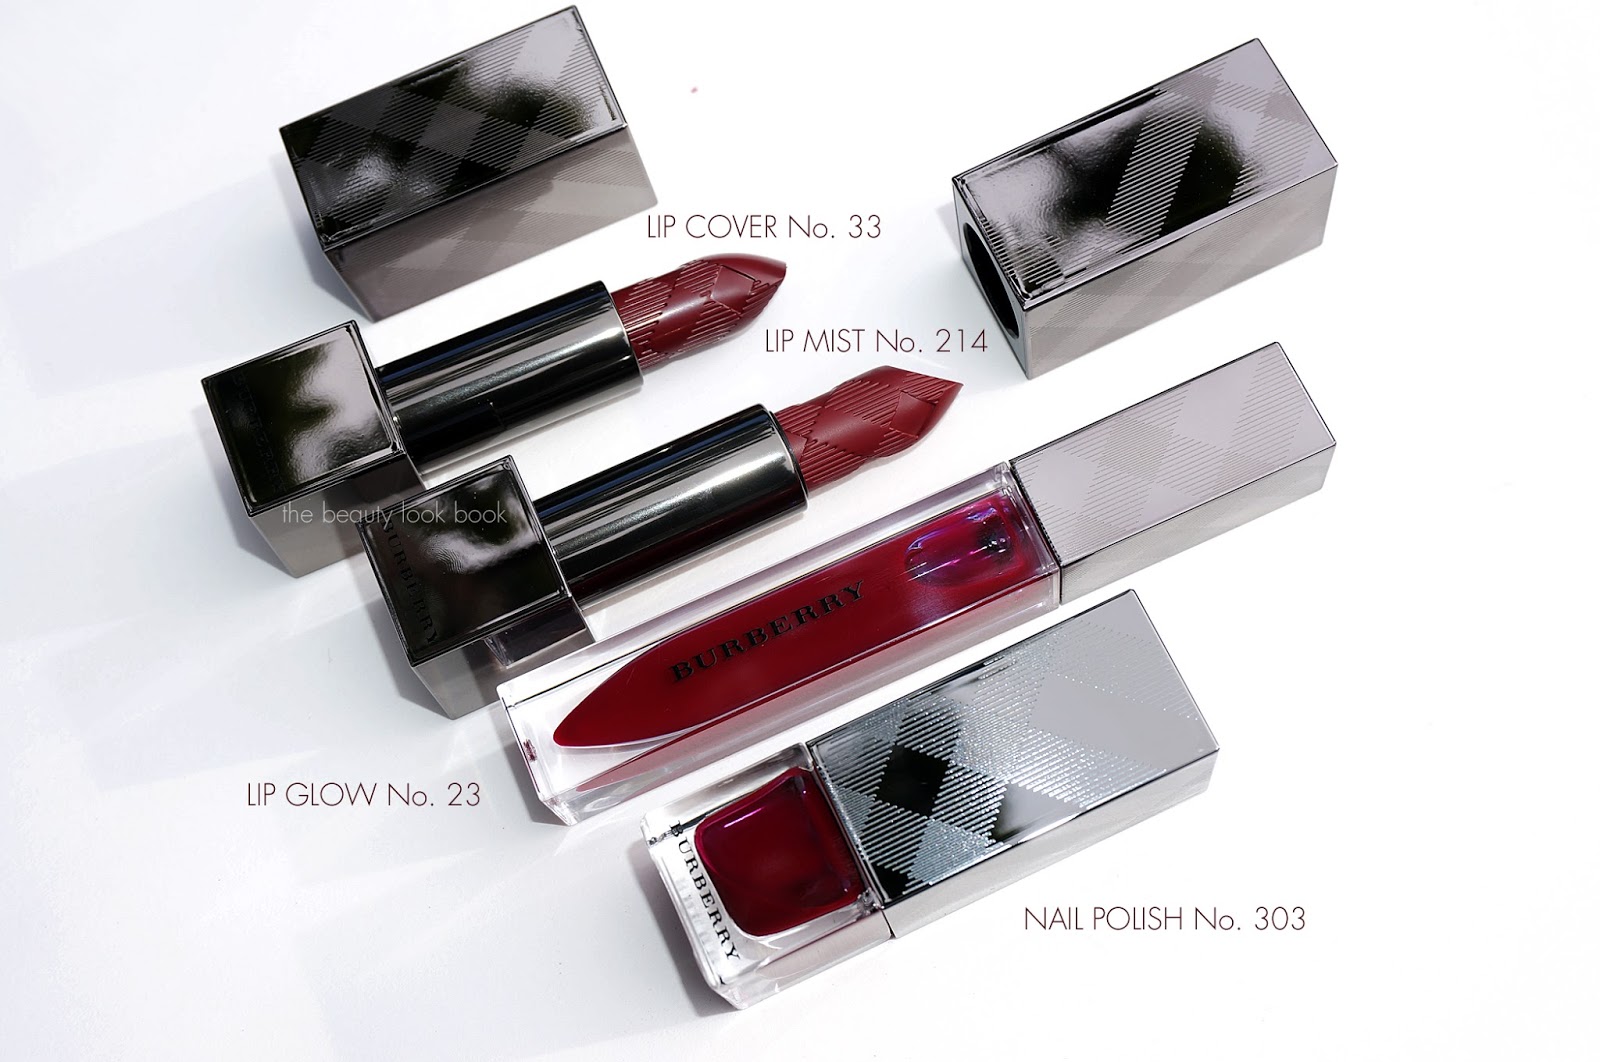 Burberry Oxblood Lip Mist, Lip Cover and Lip Glow - The Beauty Look Book